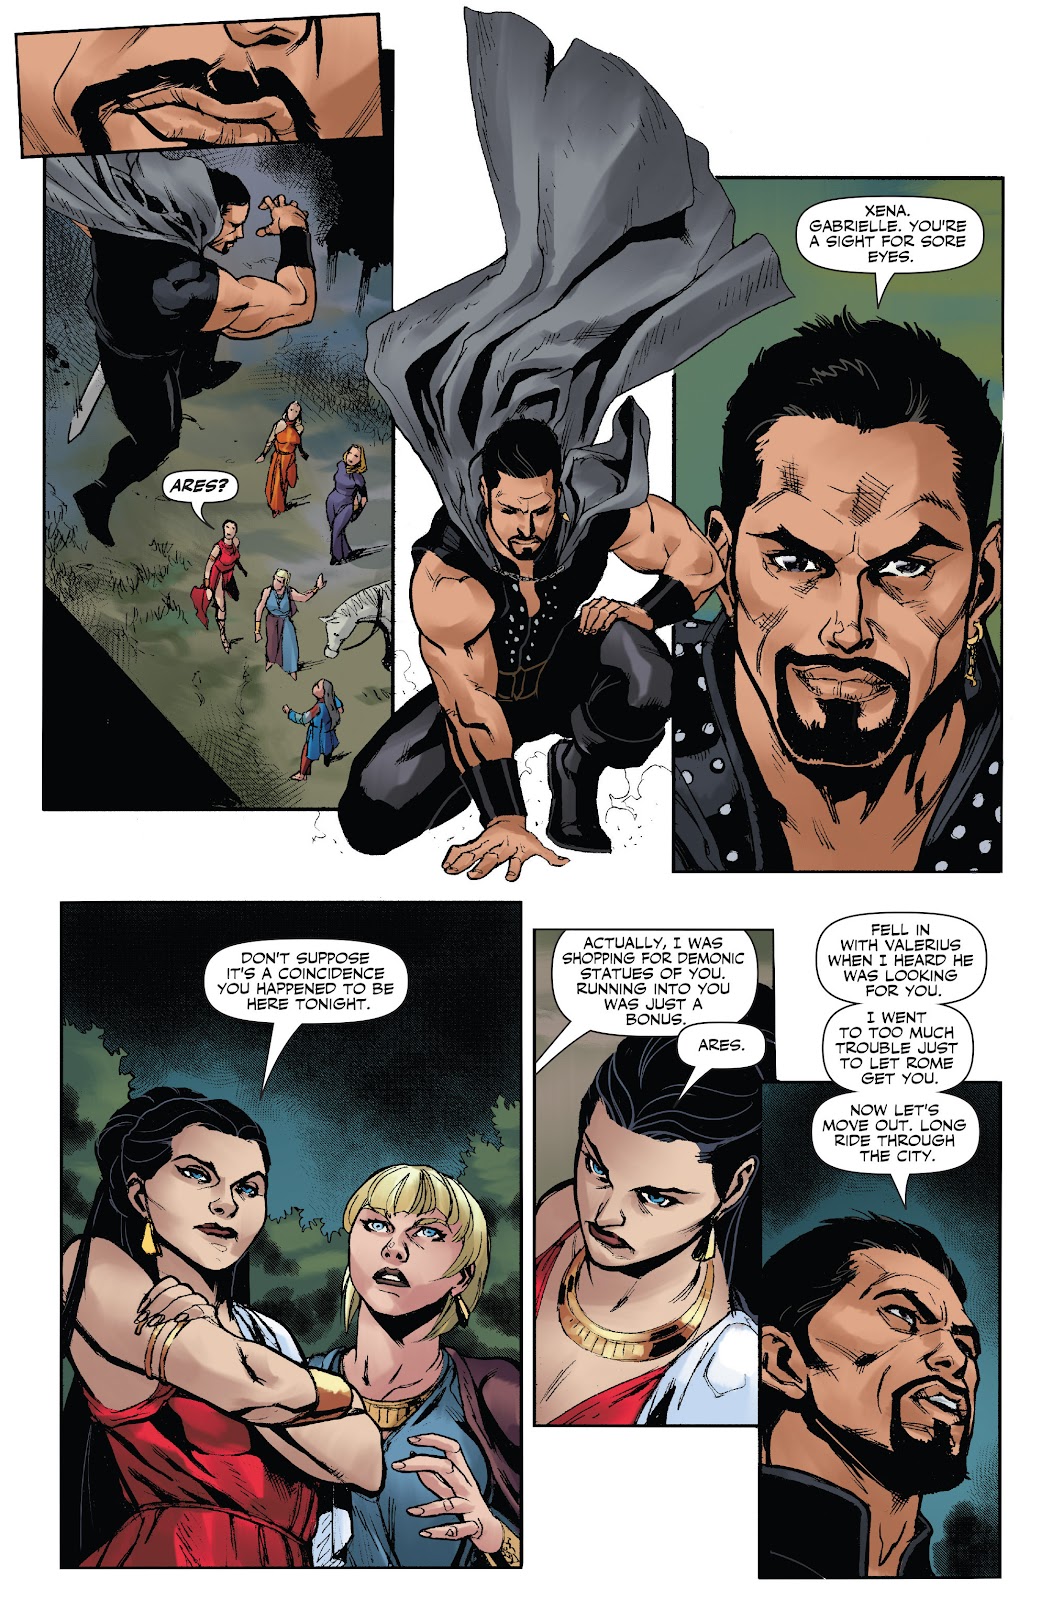 Xena: Warrior Princess (2016) issue 3 - Page 16